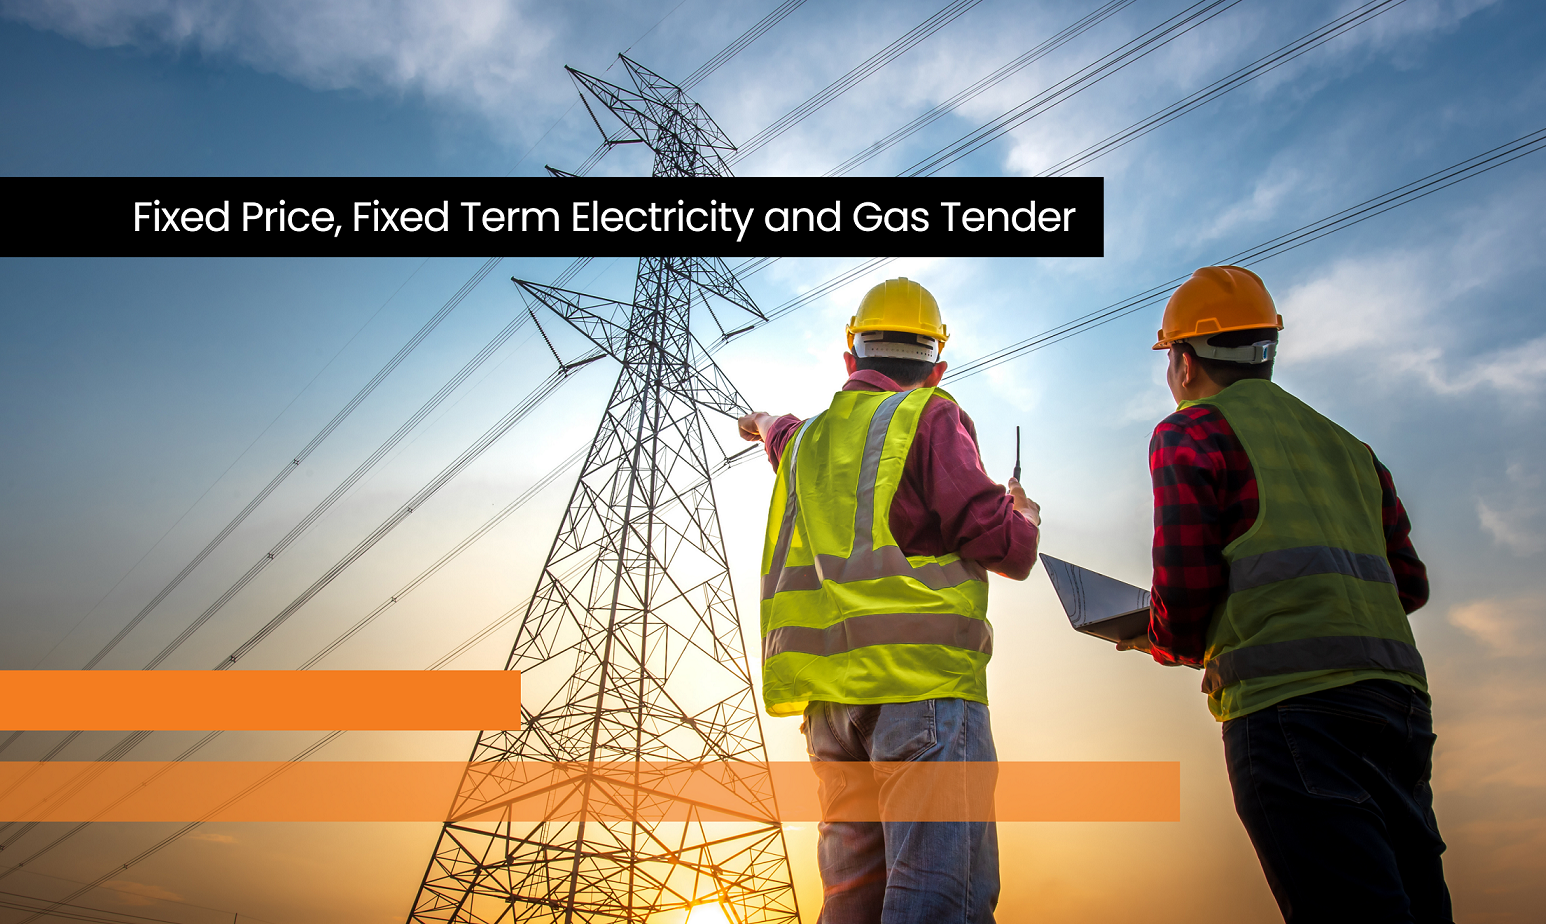 Procurement Australia’s Fixed Price, Fixed Term Electricity and Gas Tender - “The Case for Now”